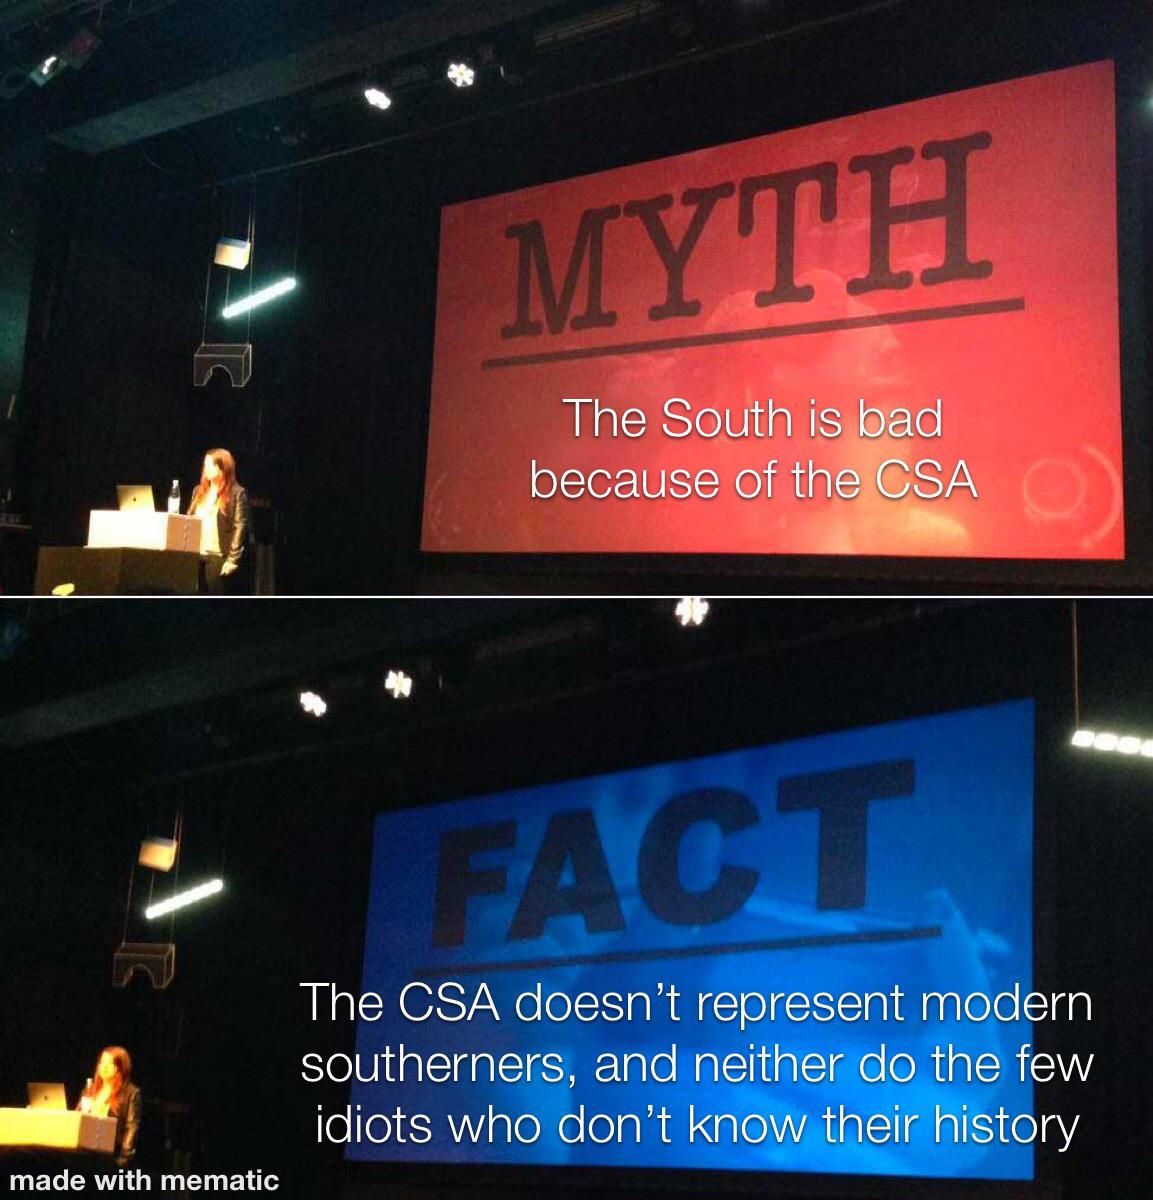 Please don’t use the CSA for unjust south-bashing. It’s dumb and makes you look dumb